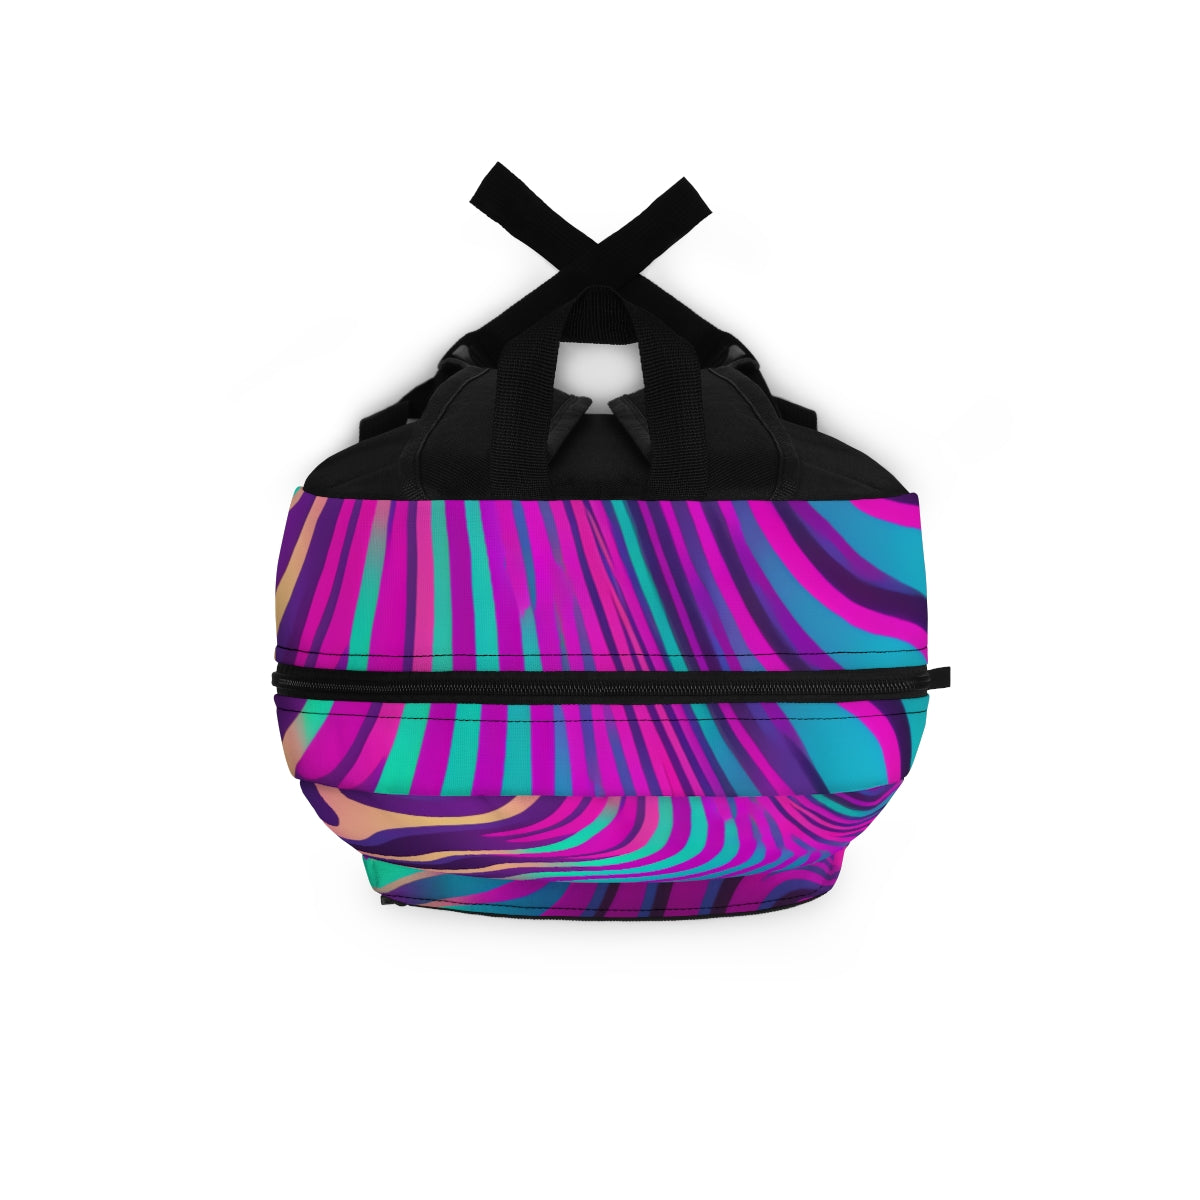 Abstract Holographic Backpack